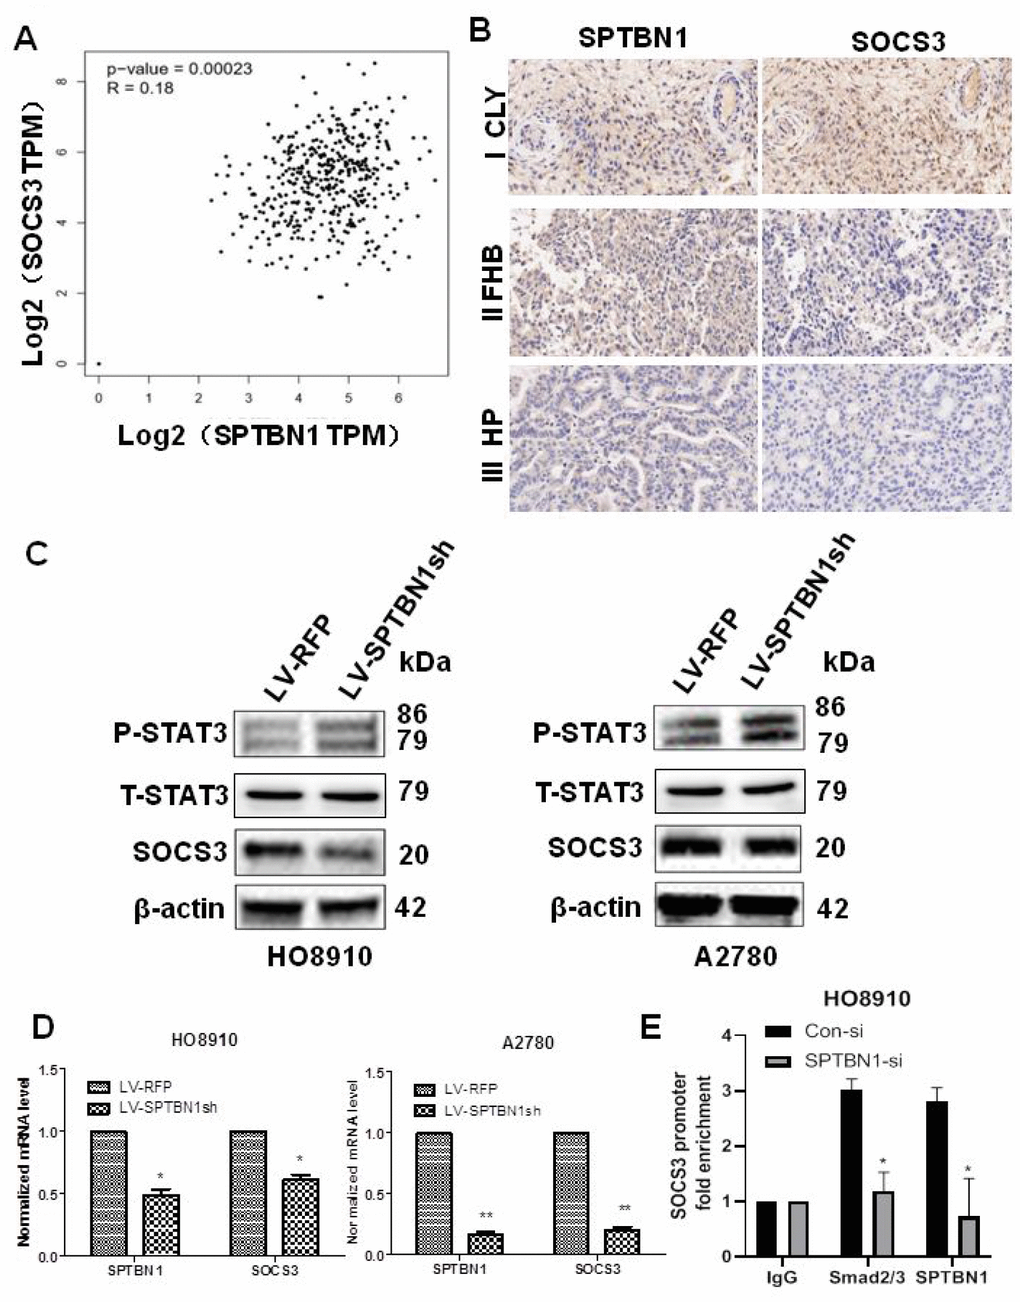 Positive correlation between the expression of SPTBN1 and SOCS3 in epithelial ovarian cancer patients and cells. (A, B) Positive correlation between SPTBN1 and SOCS3 expression was investigated by GEPIA (gene expression profiling interactive analysis, http://gepia.cancer-pku.cn) based on the TCGA dataset (A) and observed by IHC staining of ovarian cancer patient samples (n=11) with 40× magnification (B). (C) The protein level of SOCS3 was decreased, and the phosphorylated STAT3 level was increased when SPTBN1 was downregulated. (D) SPTBN1 regulated SOCS3 expression at the mRNA level. * P P E) ChIP-qPCR was performed in HO8910 cells with anti-SPTBN1 and anti-Smads2/3 antibodies to determine the enrichment of SOCS3 promoter region sequences in the obtained ChIP DNA. *P 